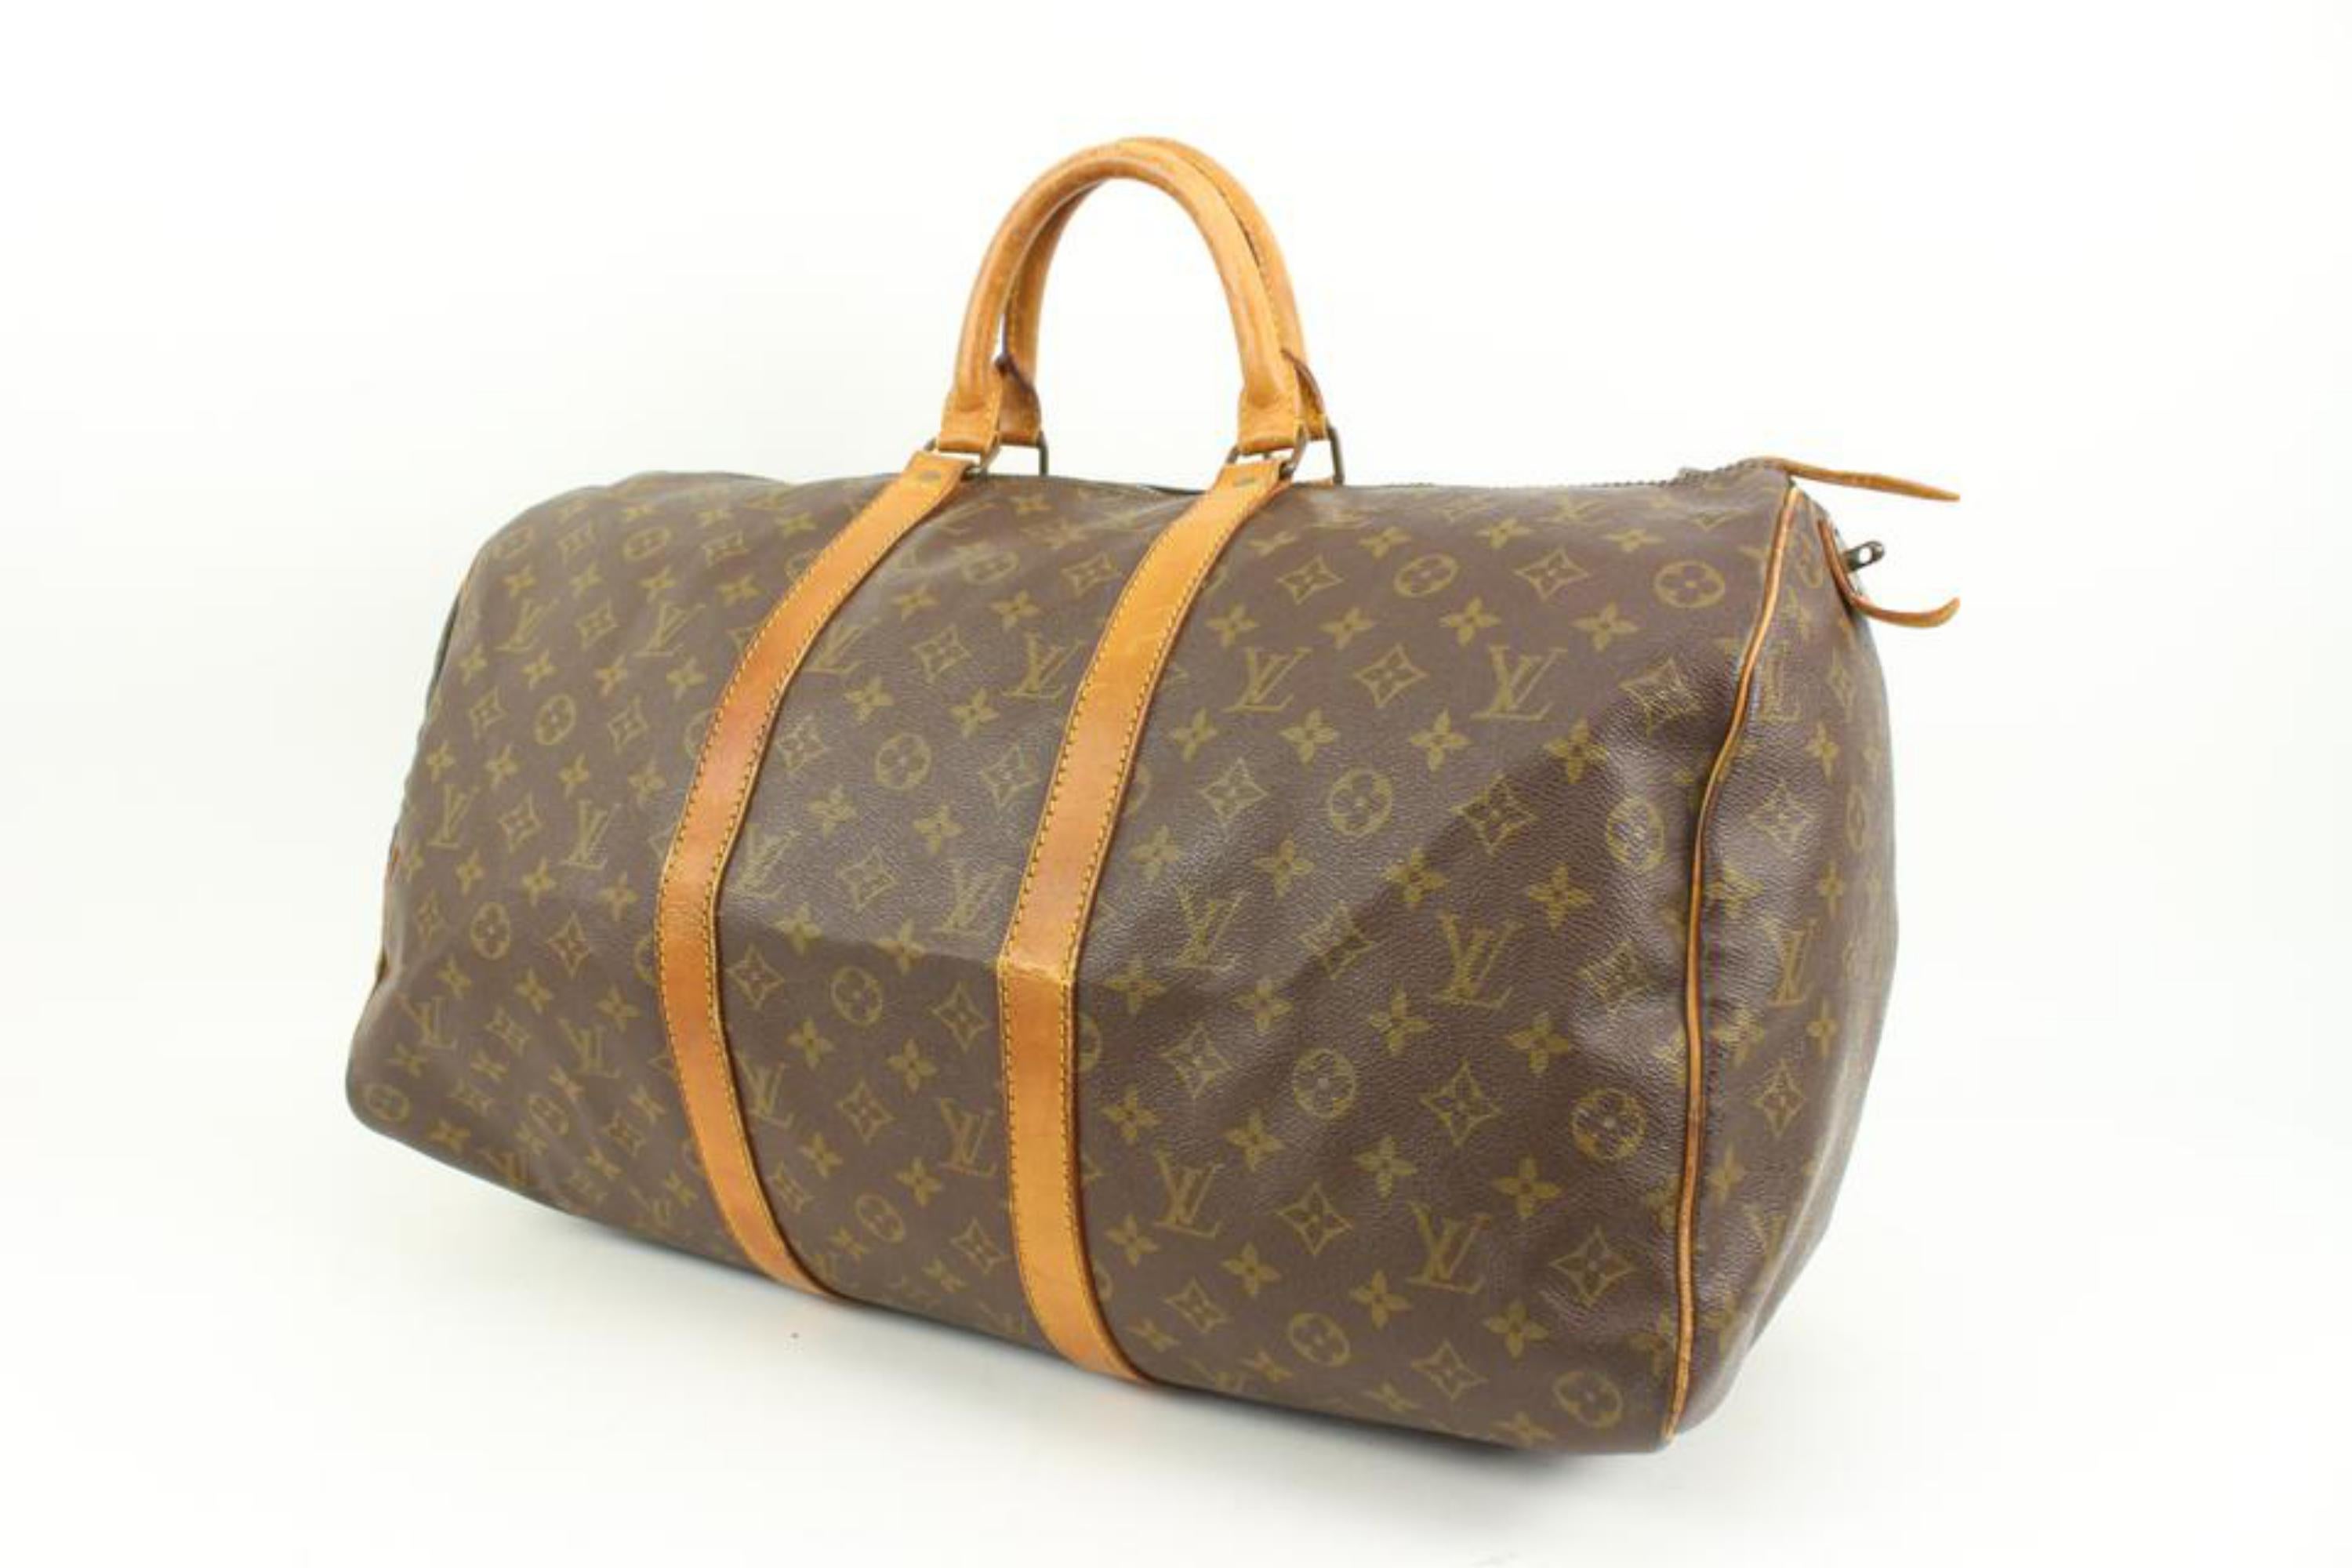 Louis Vuitton Monogram Keepall 50 Duffle Bag Upcycle Ready 45lk23
Date Code/Serial Number: xxx SD
Made In: France
Measurements: Length:  20